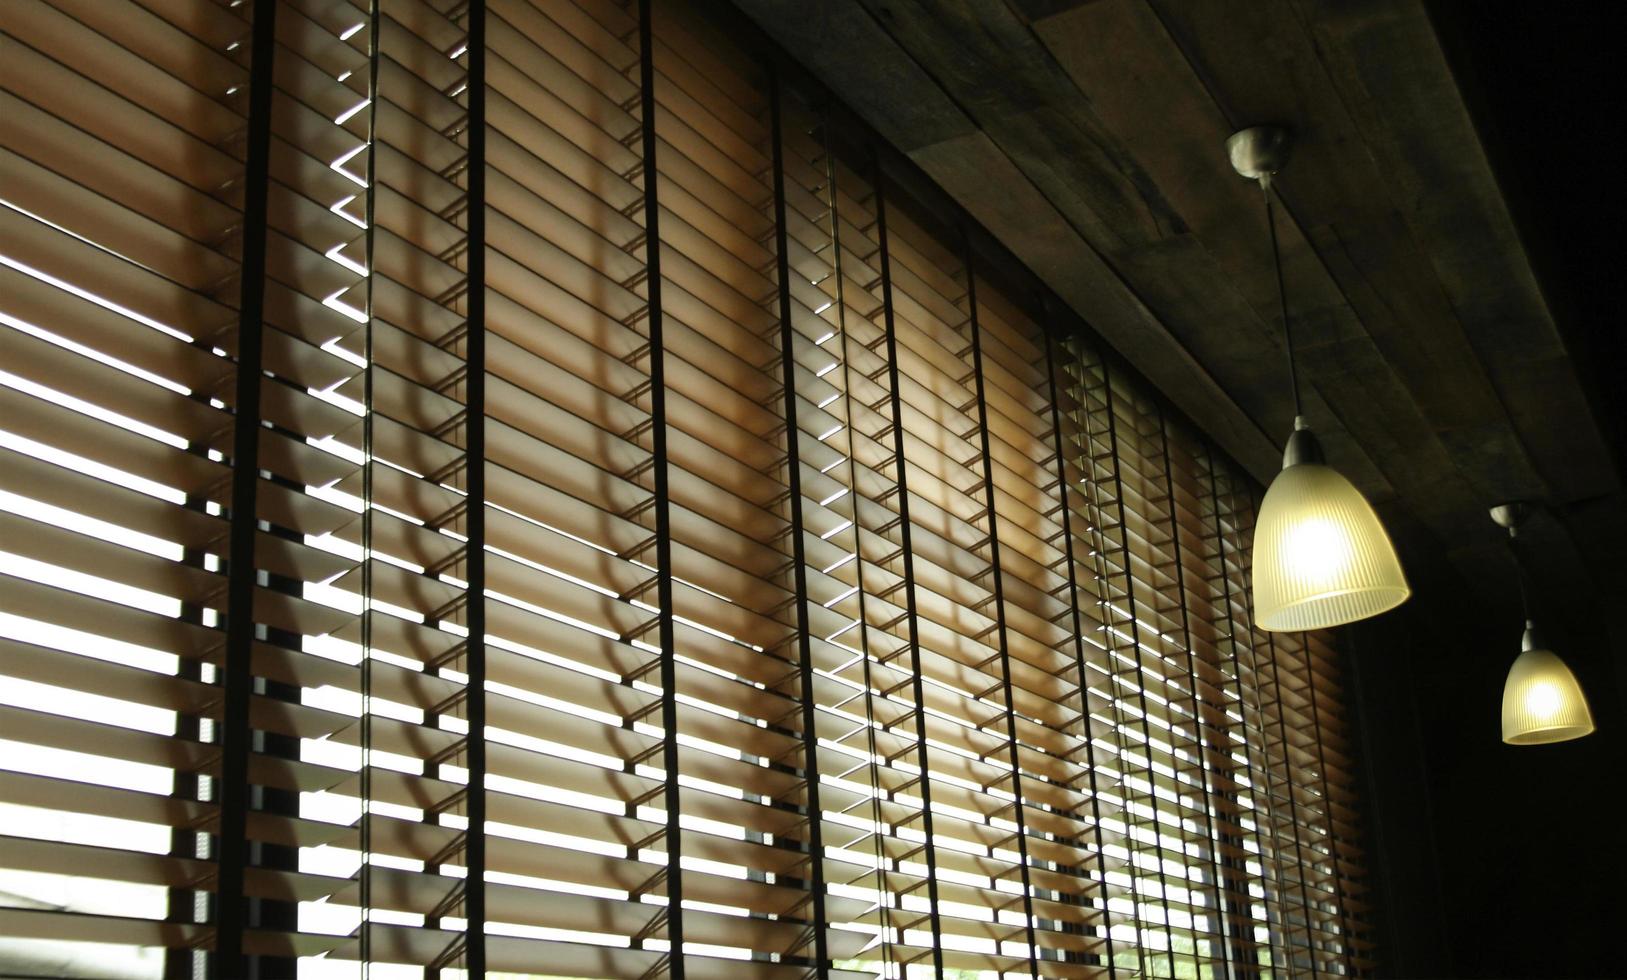 Blinds and lights photo